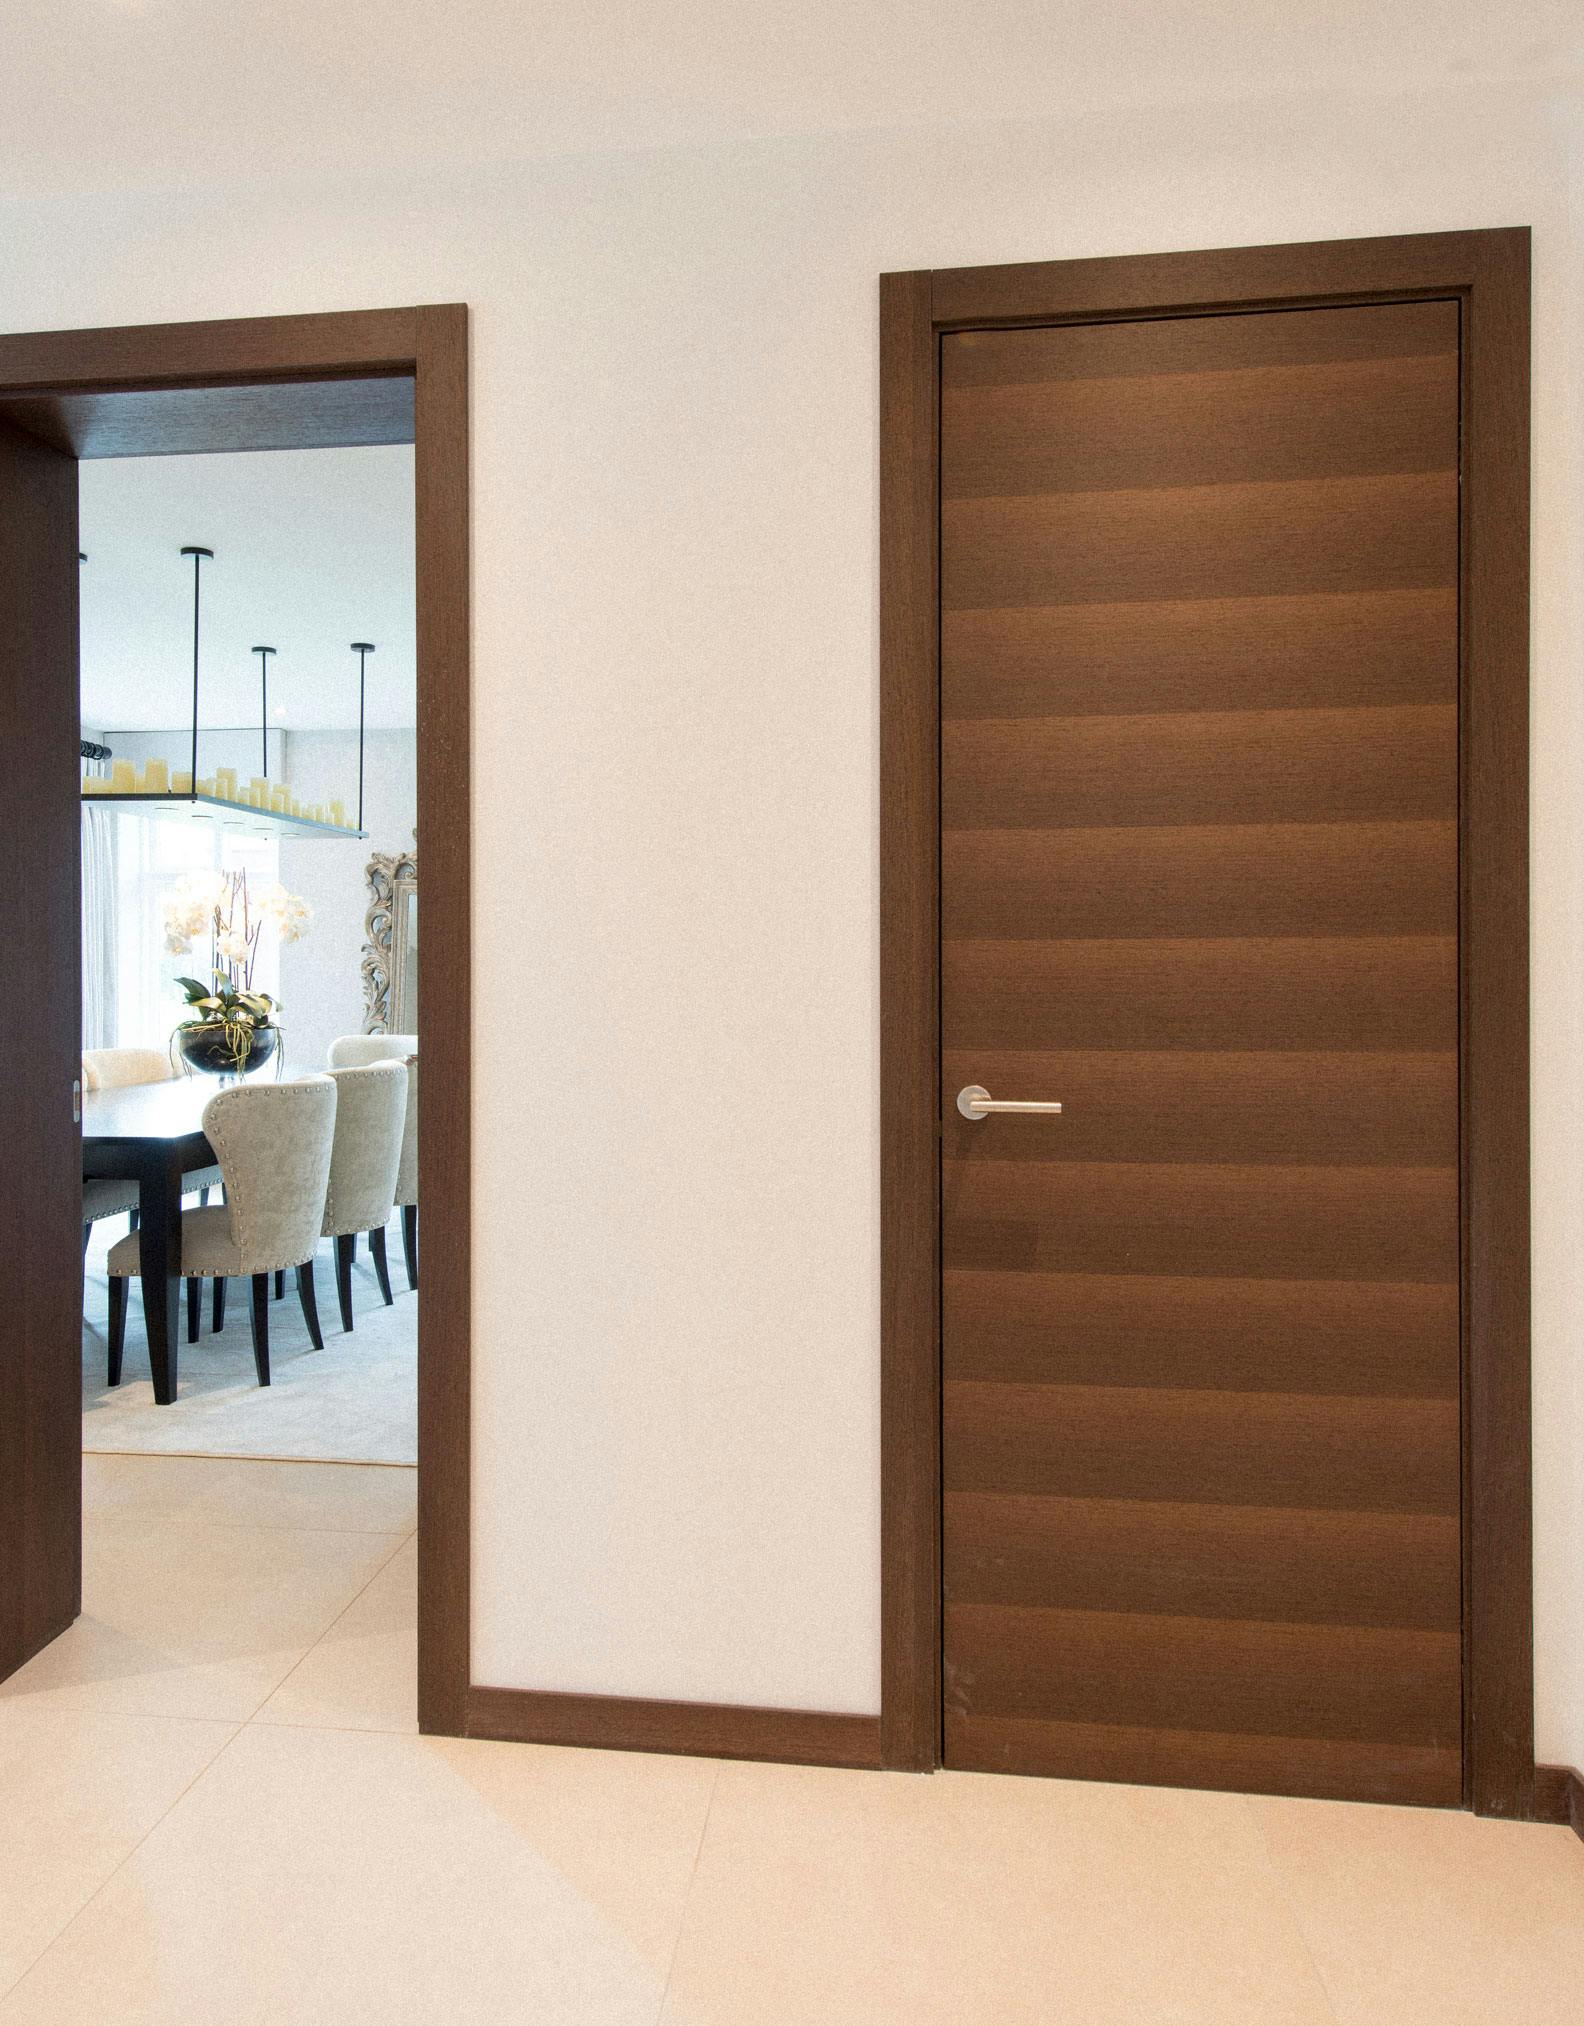 Light and airy hallway with two modern internal door sets by Deuren - Trem H style, Wenge finish.